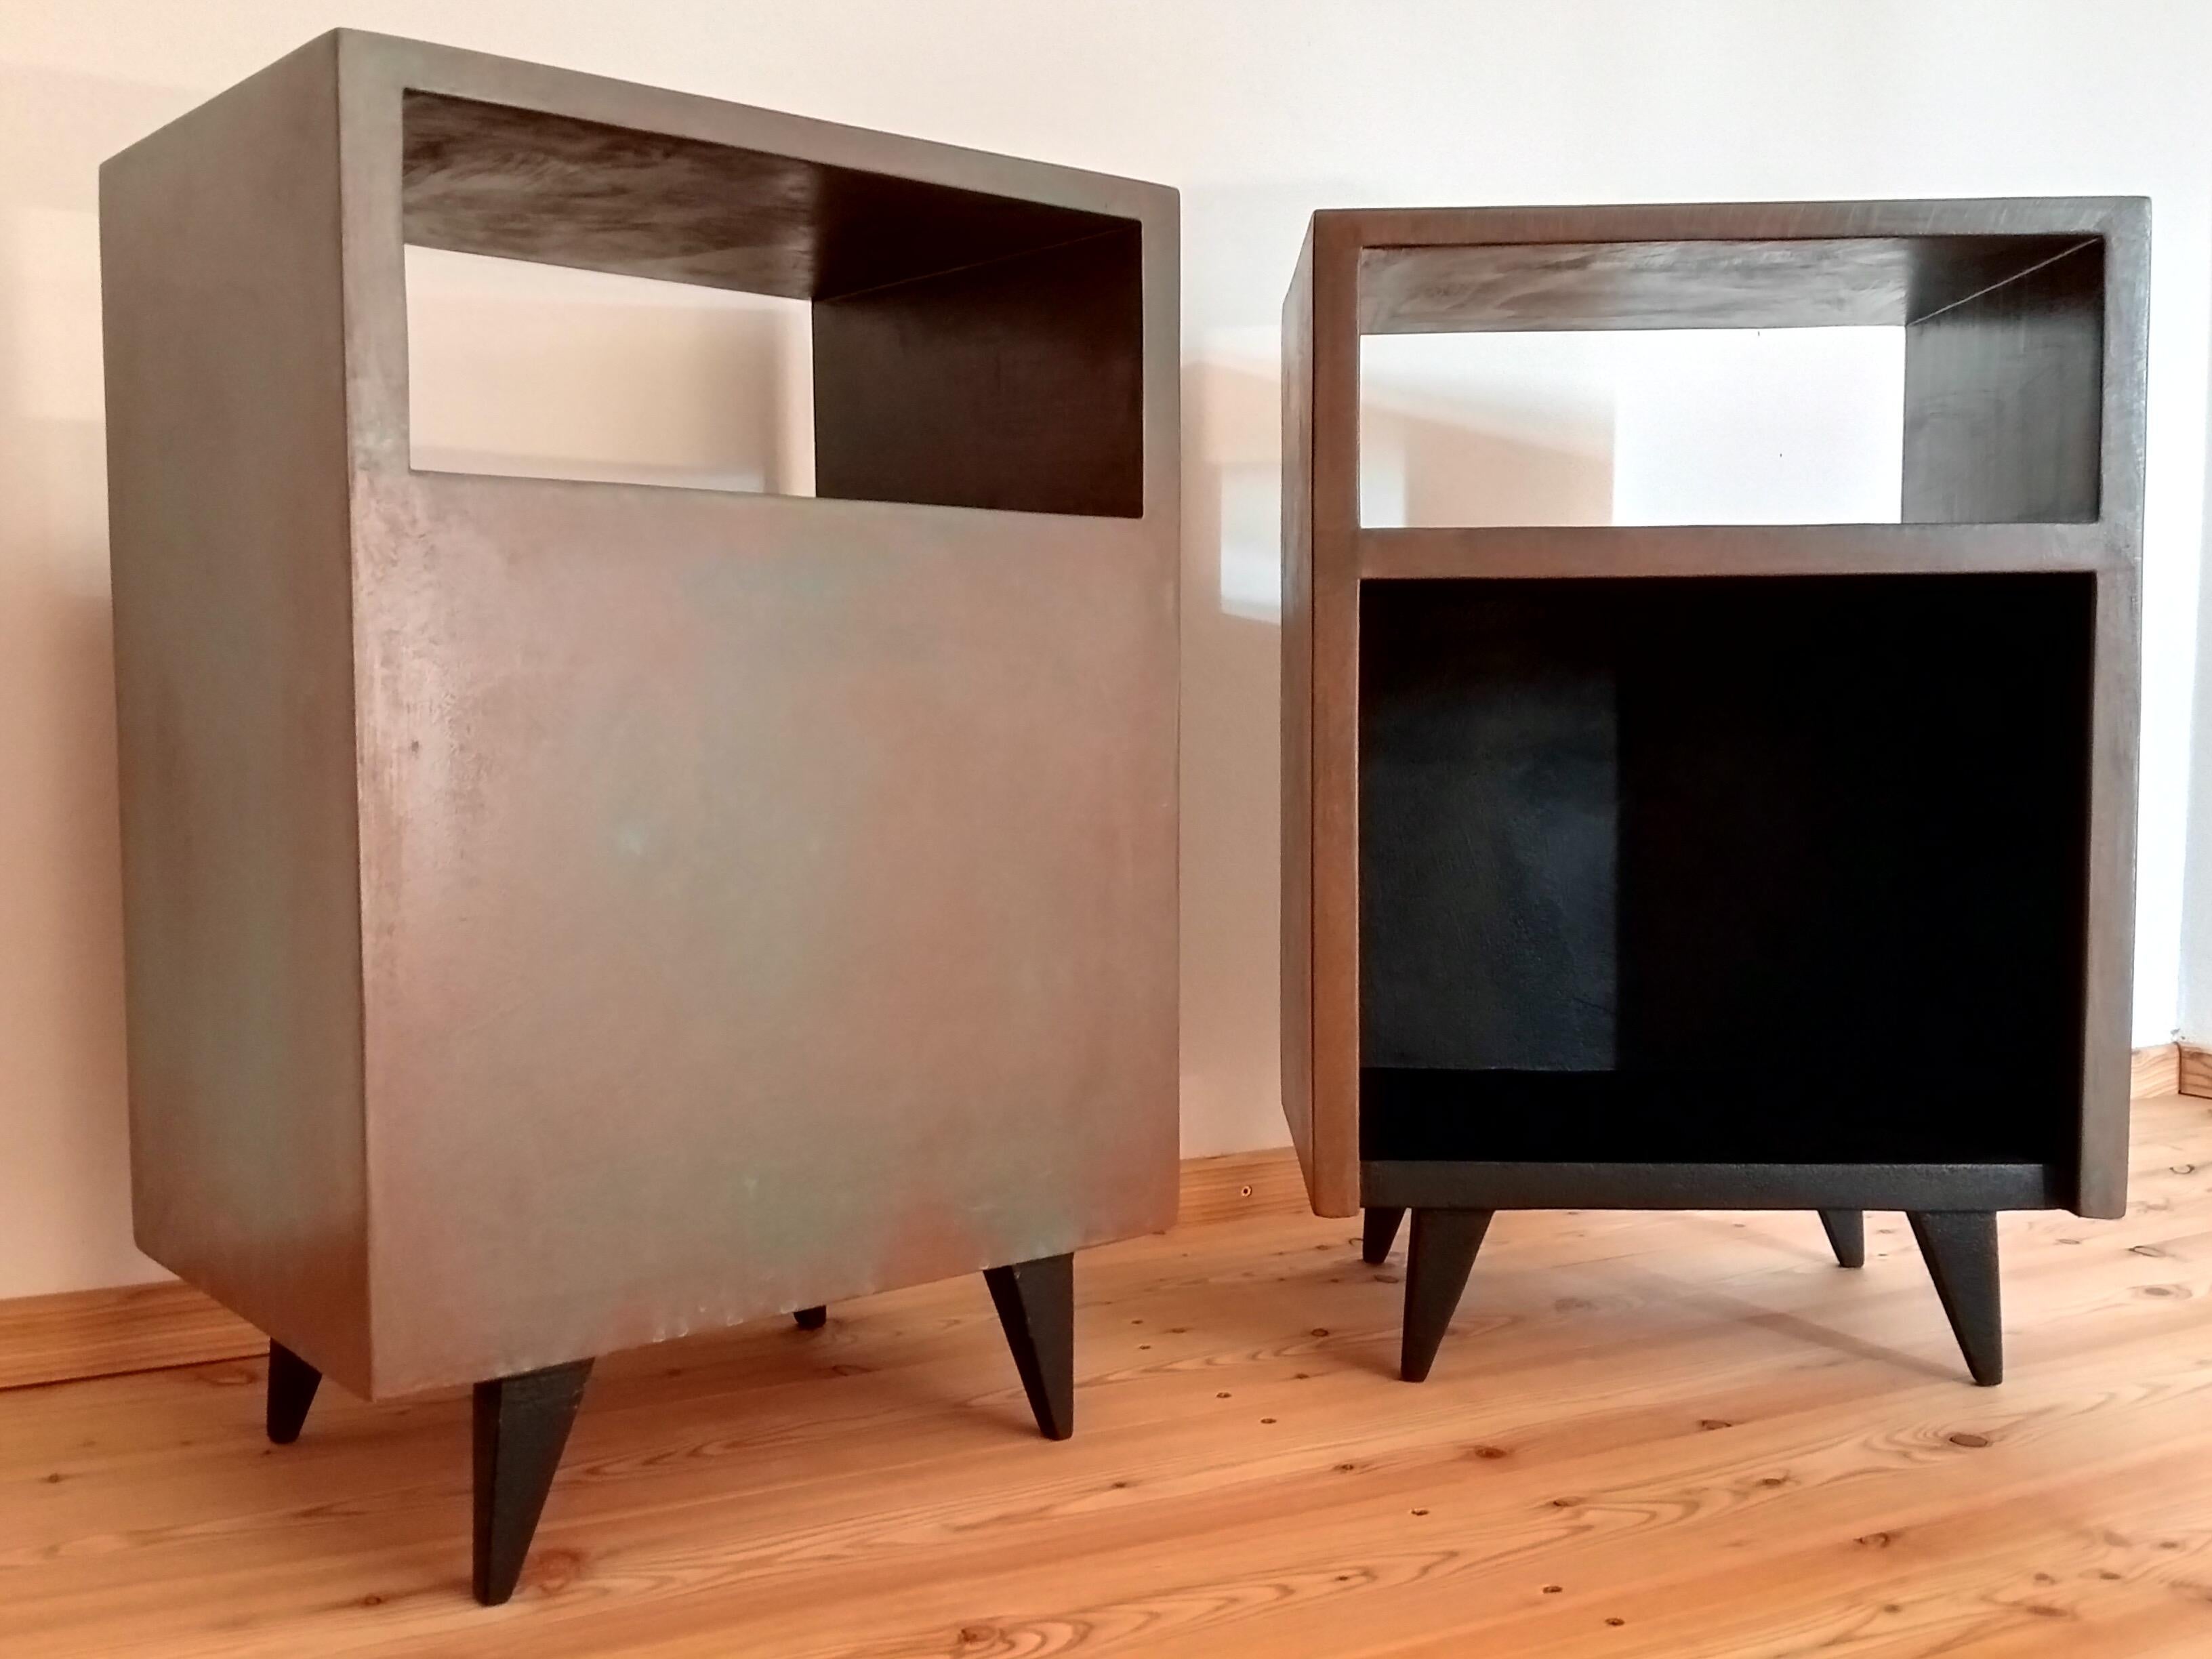 Two Night Tables Italian Design Handcrafted Contemporary Wood and Oxidized Resin For Sale 5